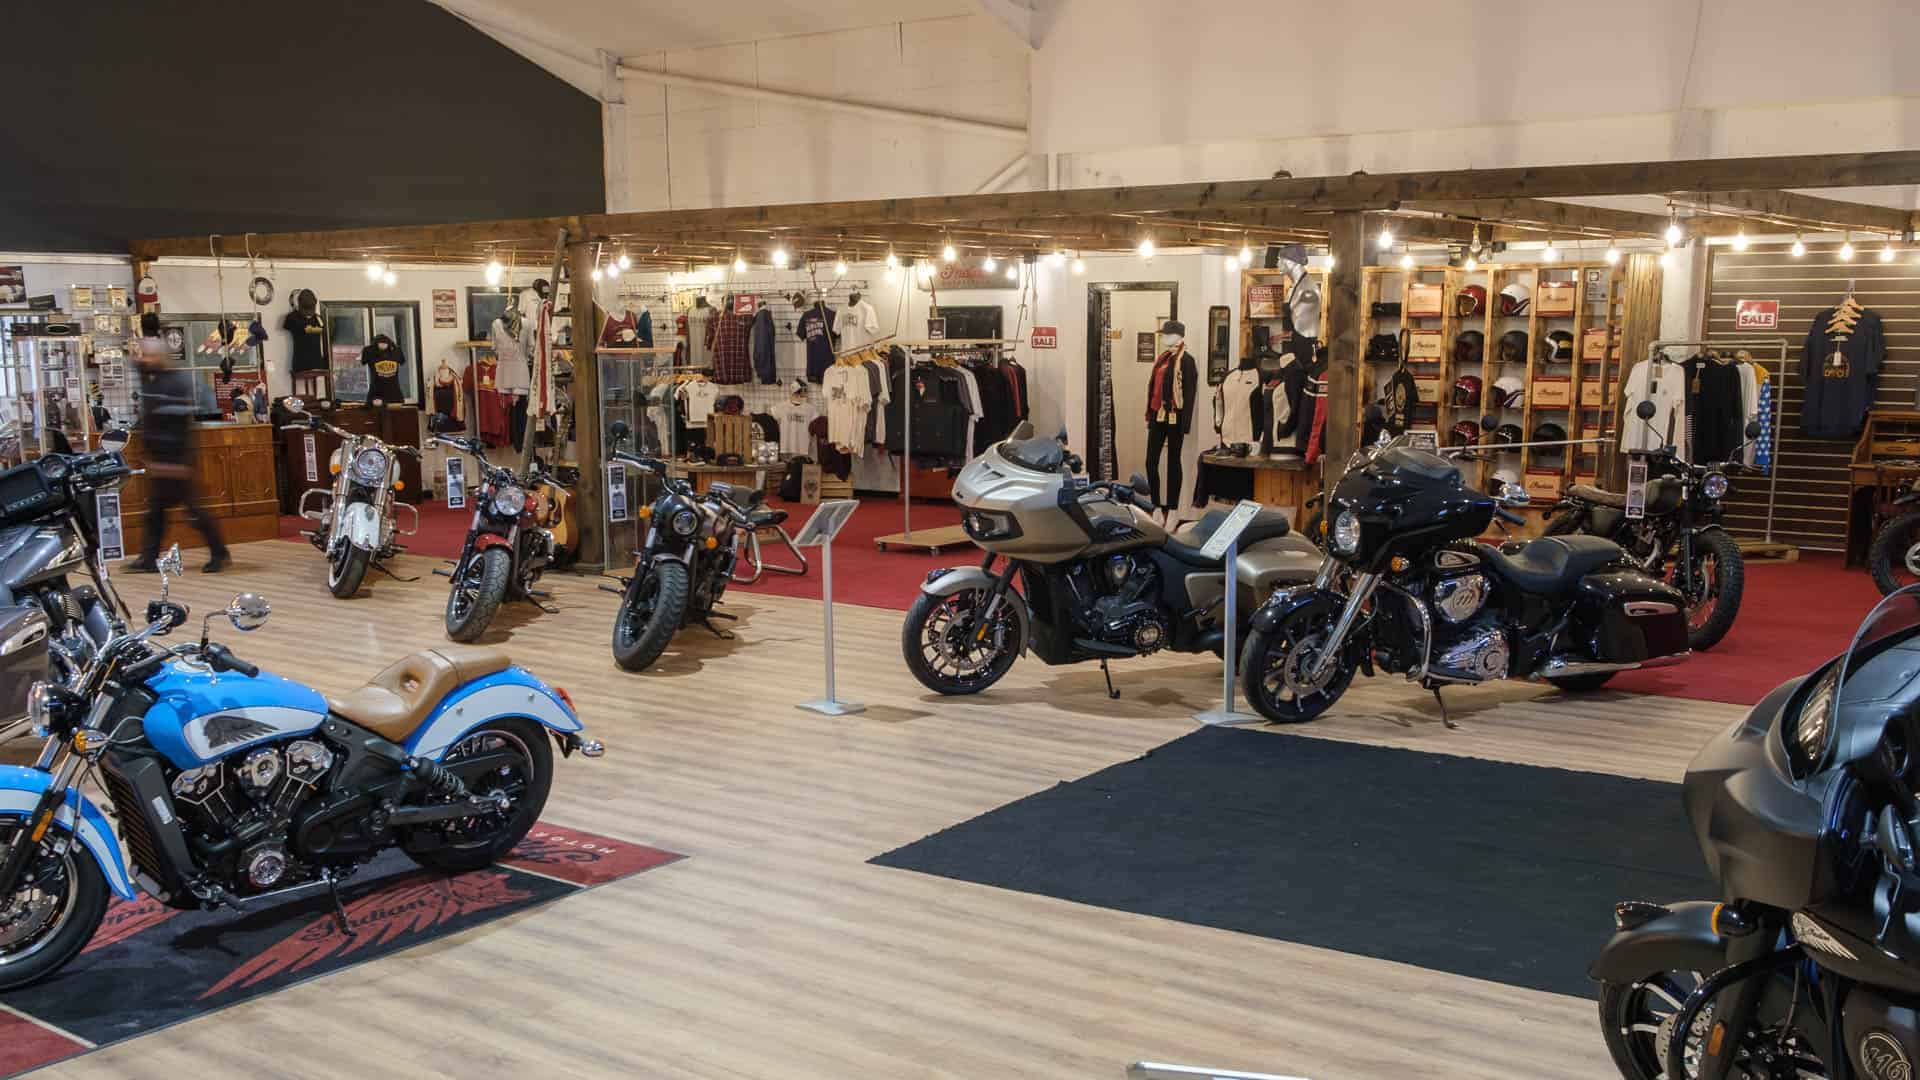 shop full of motorcycle clothing and motorcycles on display